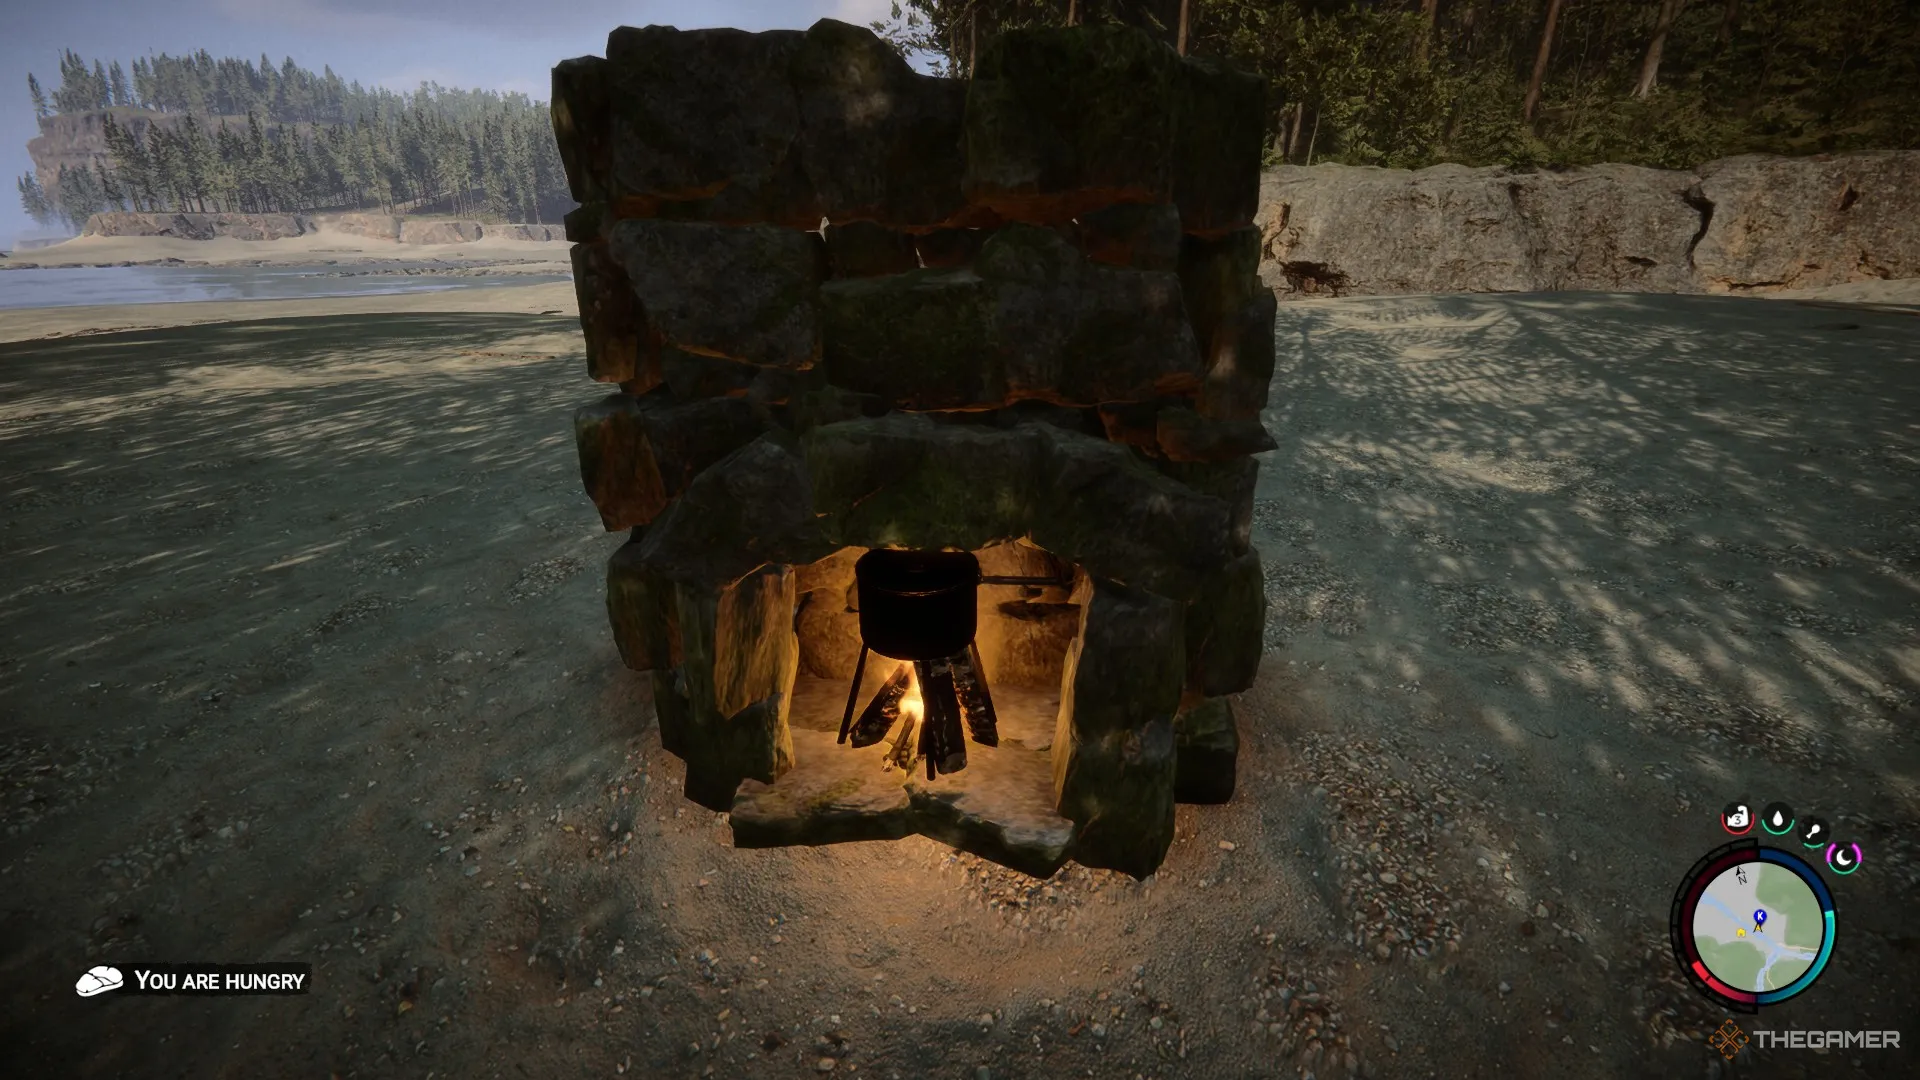 A screenshot from Sons of the Forest showing a fire with a cooking pot on top in a Stone fireplace resting on a beach.